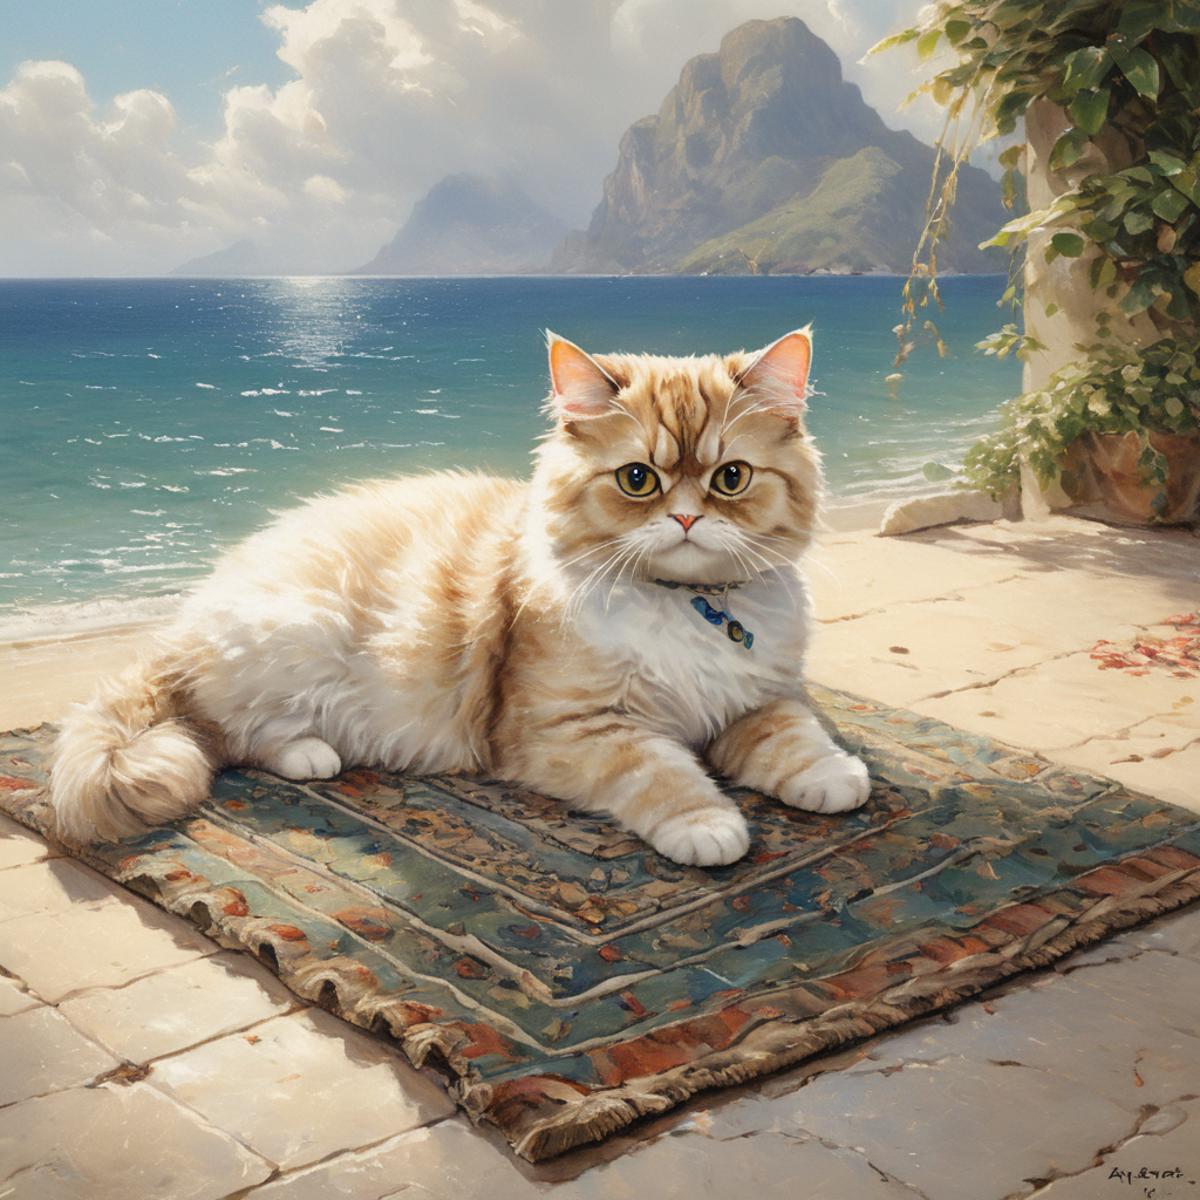 An orange and white cat sitting on a rug near the ocean.